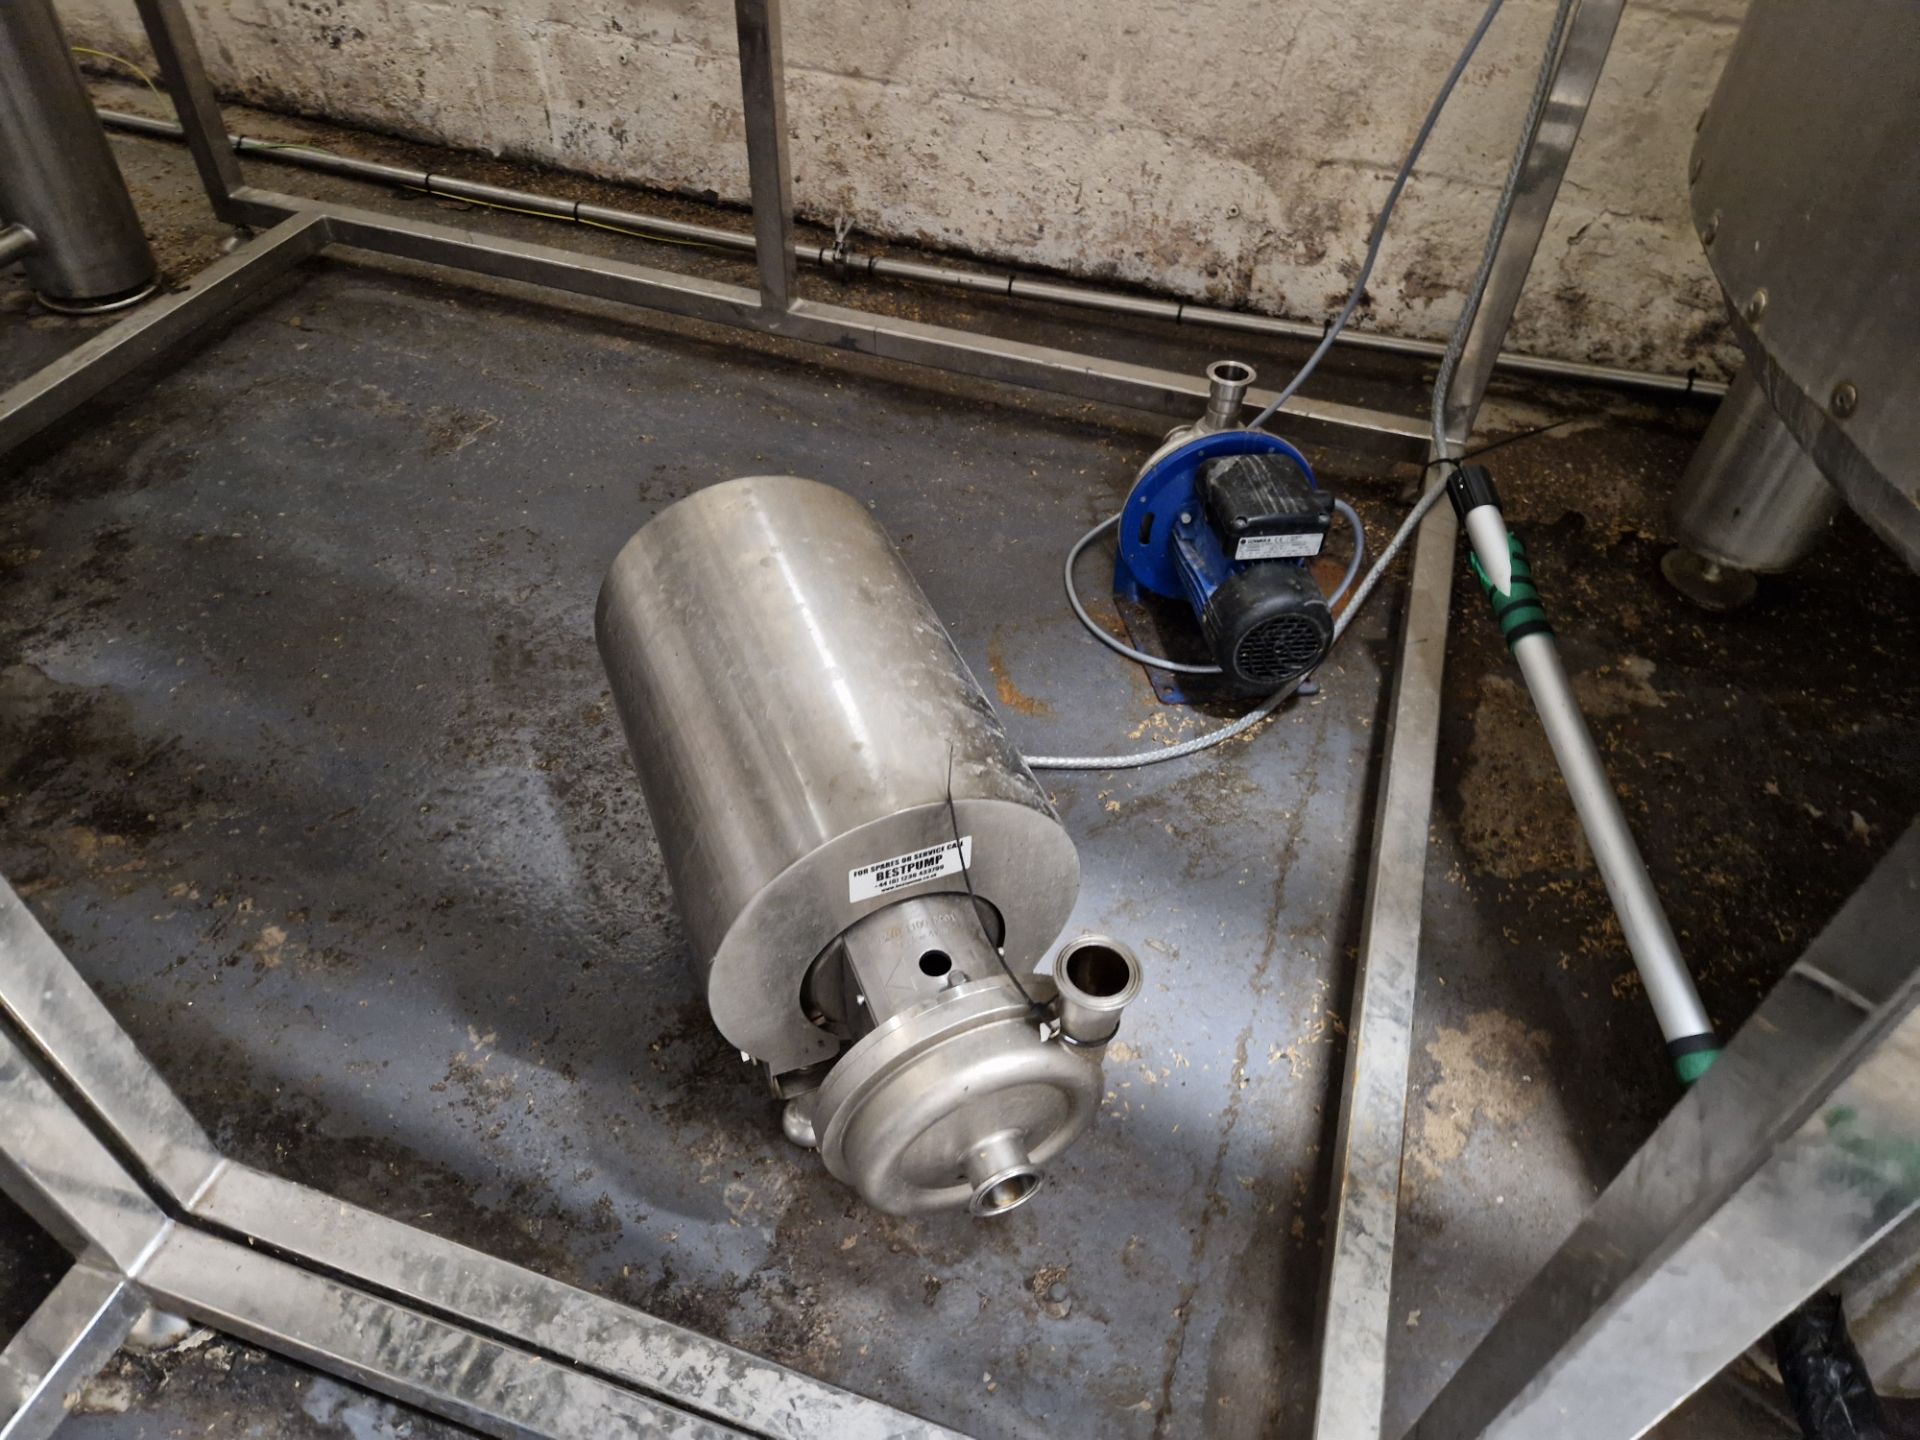 Willis European Ltd 15BBL Mash Tun, serial no. KB-202000512001, year of manufacture 2020, with - Image 12 of 14